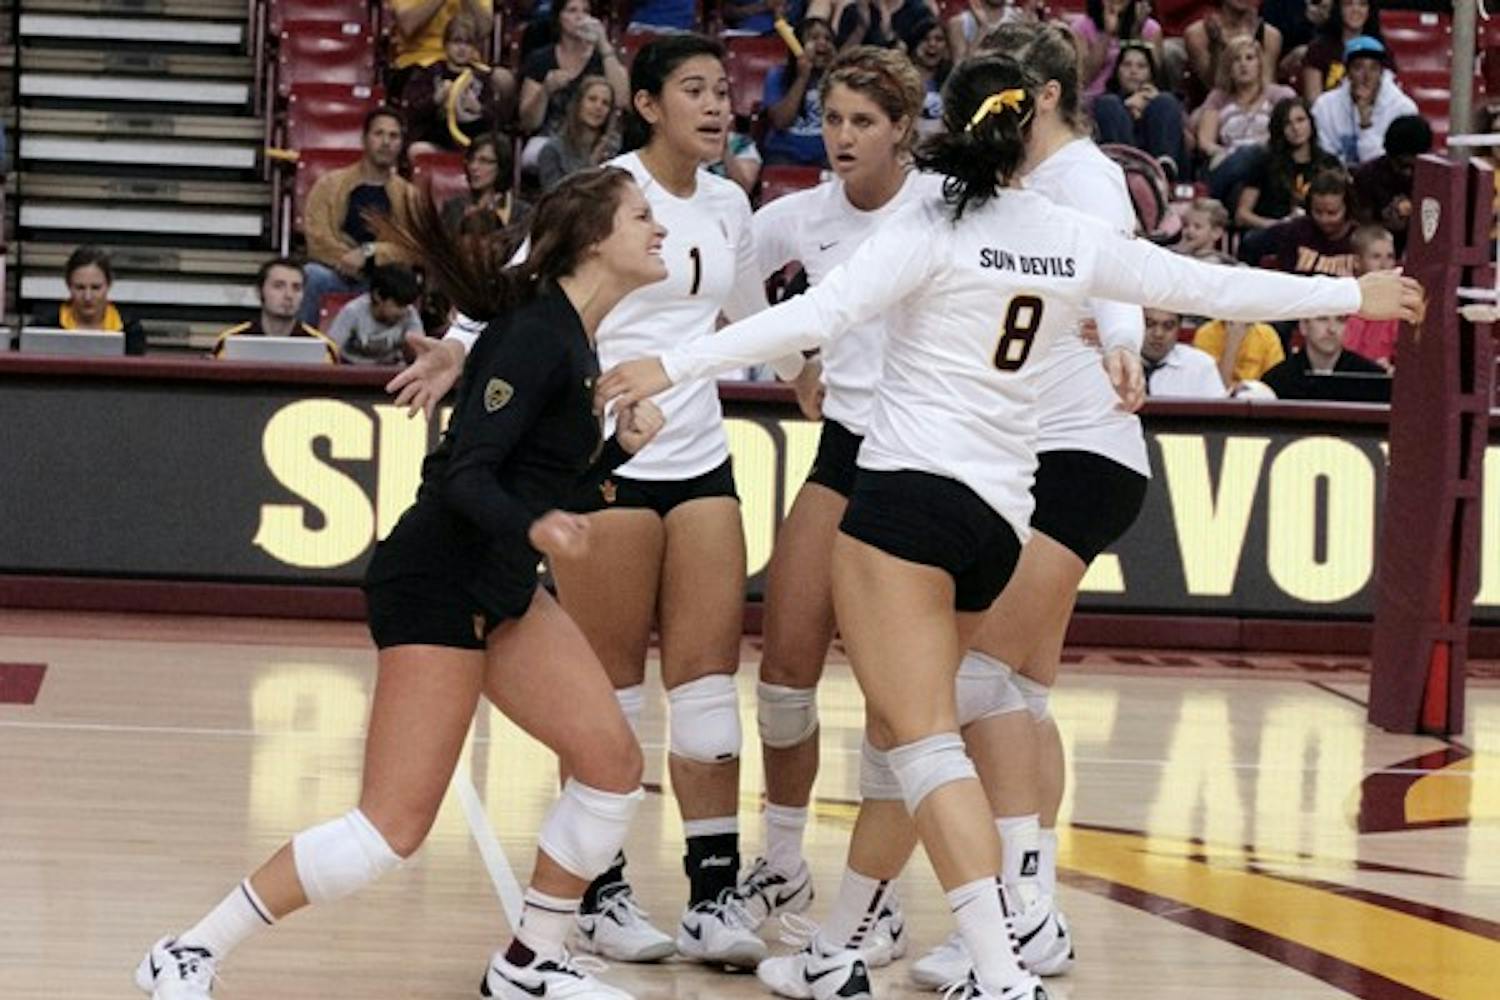 RALLYING TOGETHER: Several ASU volleyball players celebrate after a point during the third game of the Sun Devils’ Nov. 7 match against UCLA. After a close loss to No. 2 Cal on Oct. 1, the Sun Devils believe they can upset the Bears and No. 5 Stanford over the weekend. (Photo by Michaela Mader)